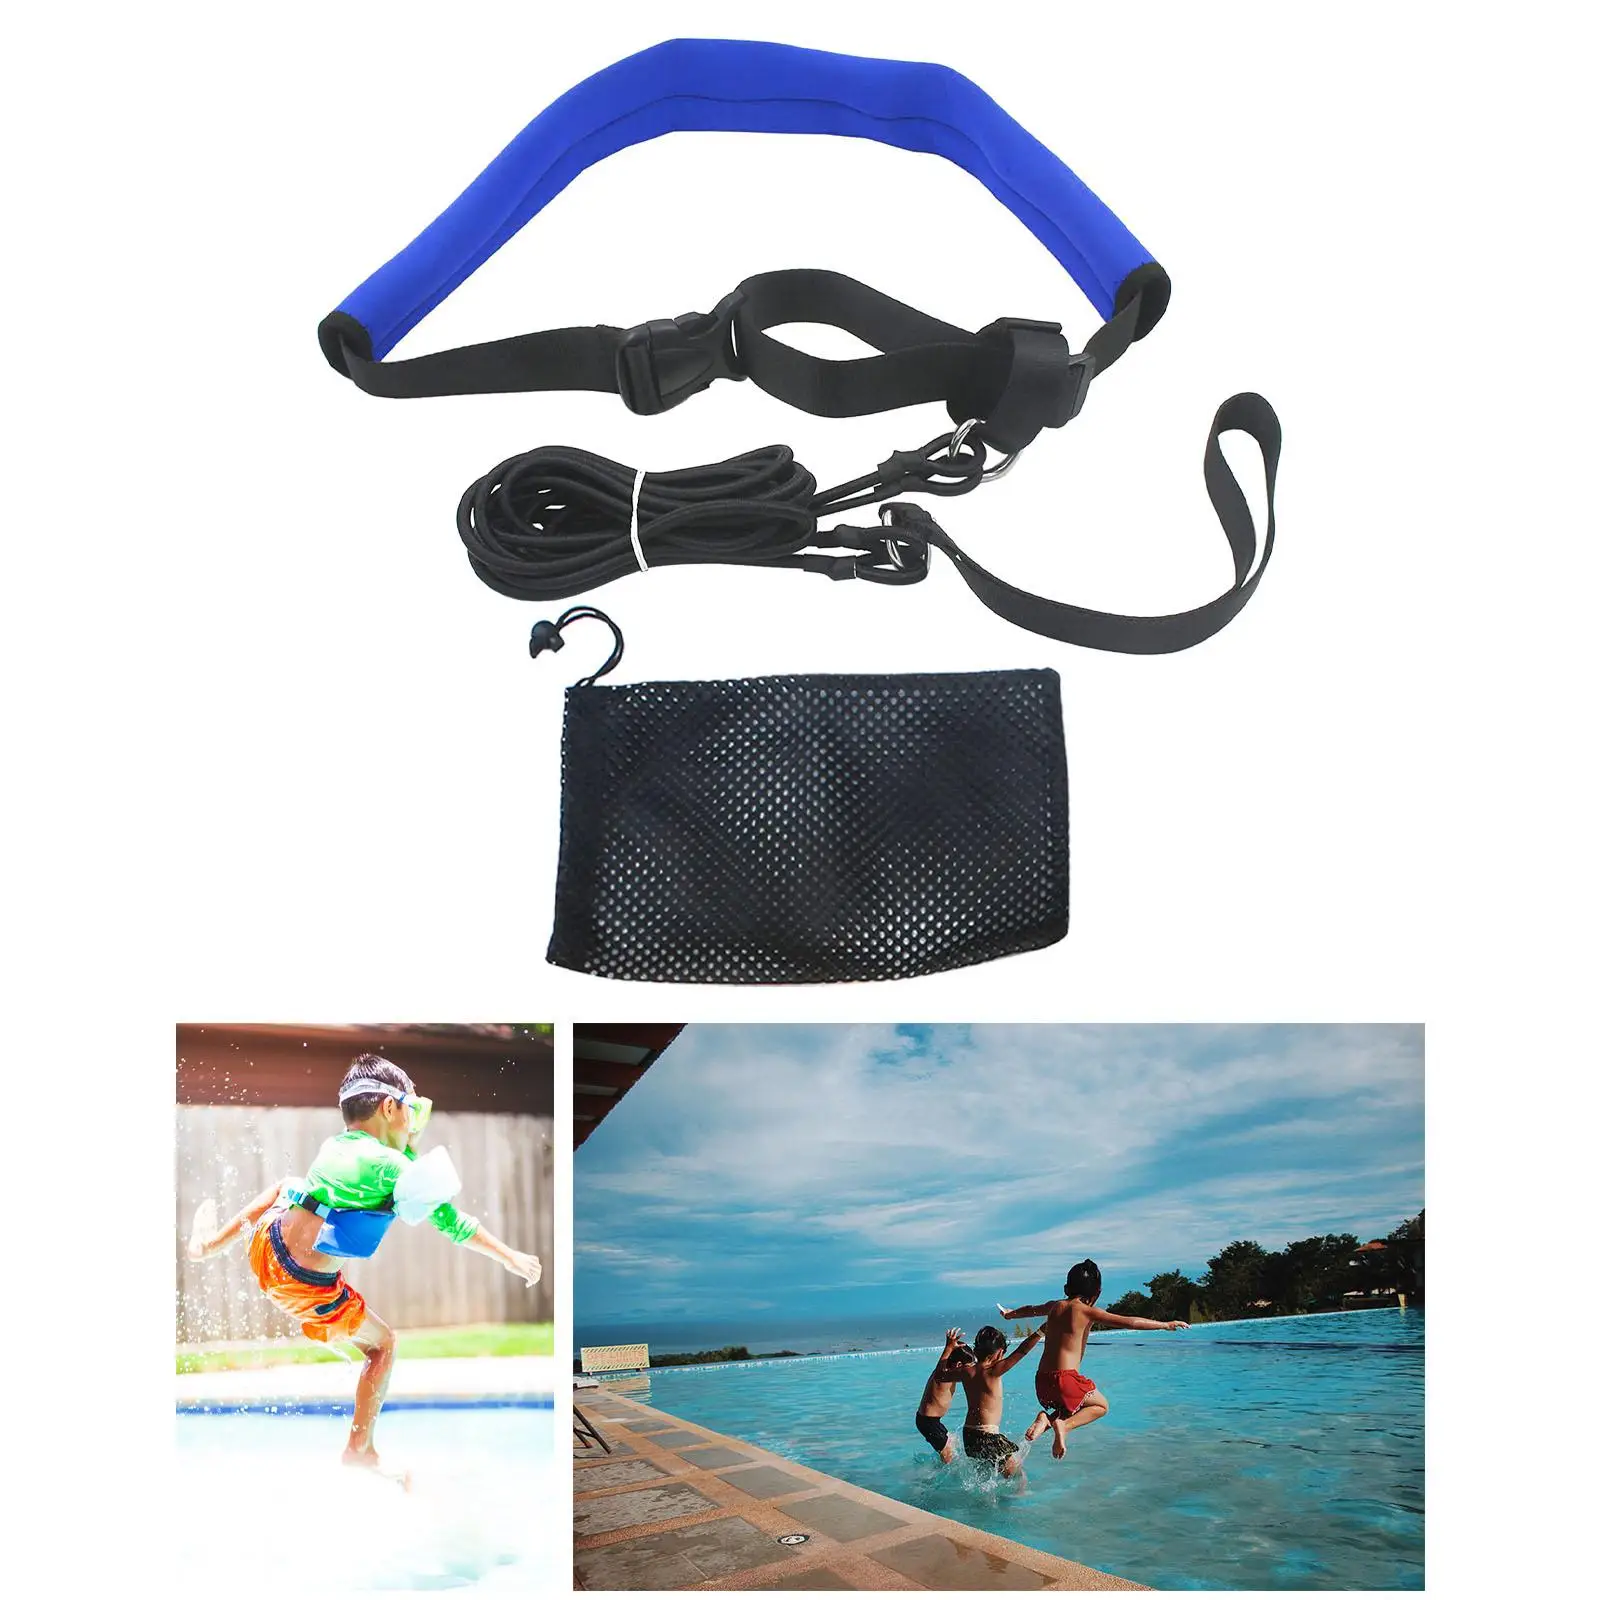 Stationary Swimming Speed Training Swim Resistance Tether Swim Training Leash for Athletes Adults Professionals Beginners